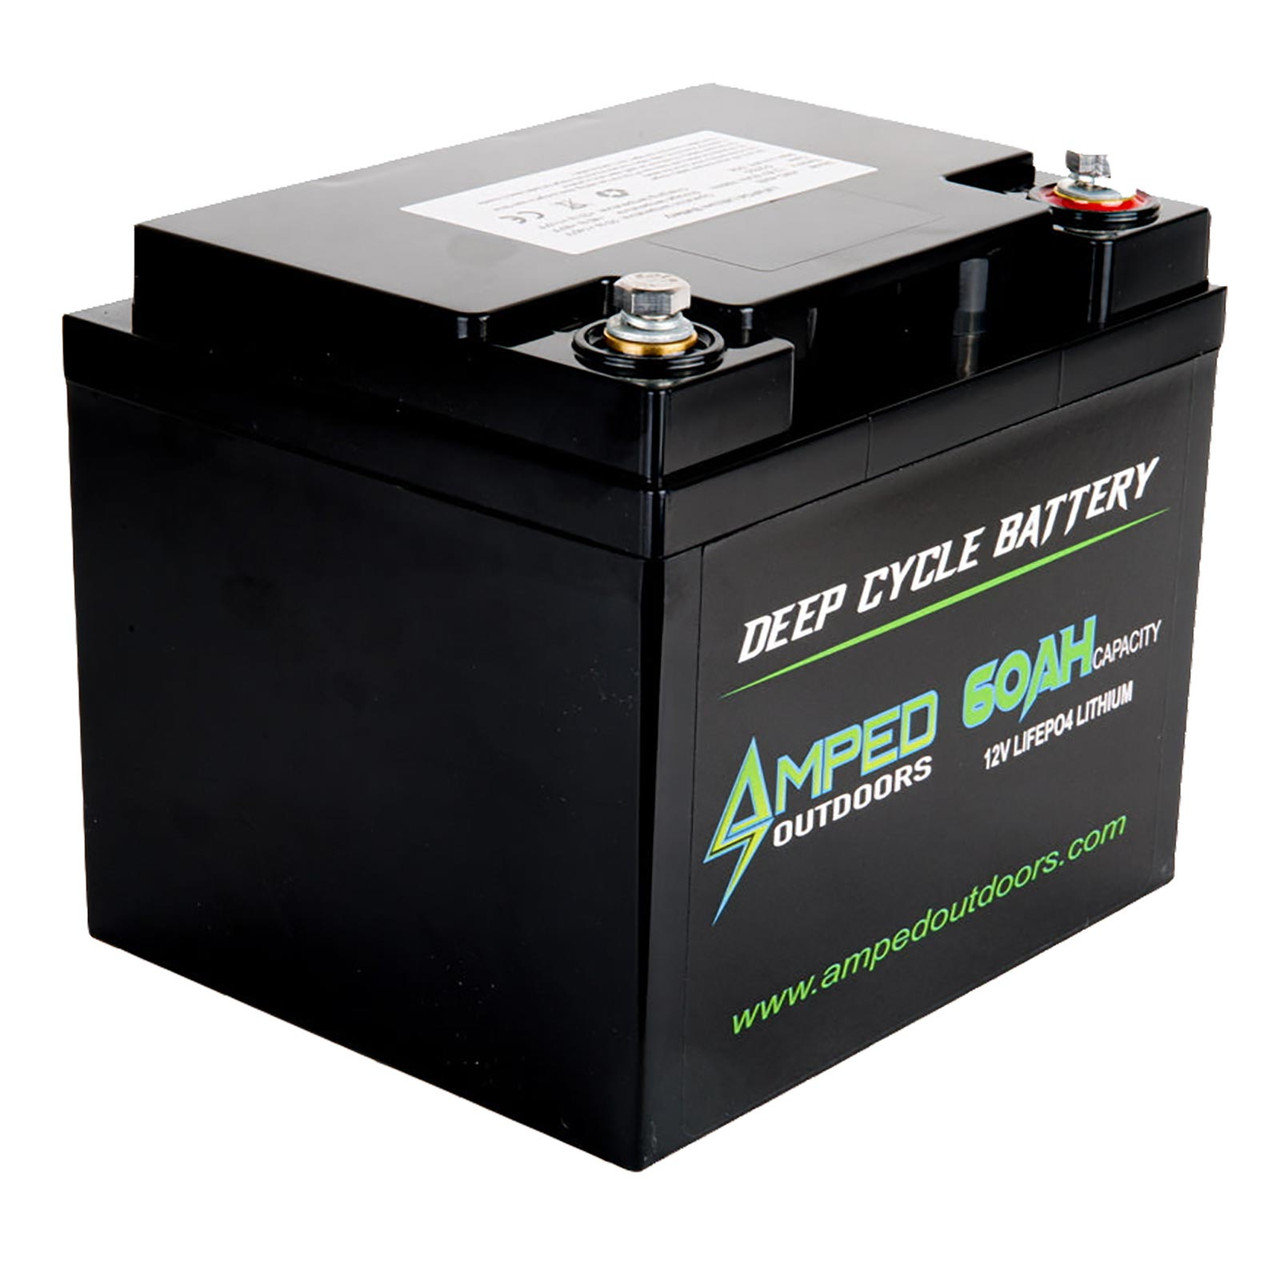 Amped Outdoors 12v 60Ah LiFePO4 Lithium Battery